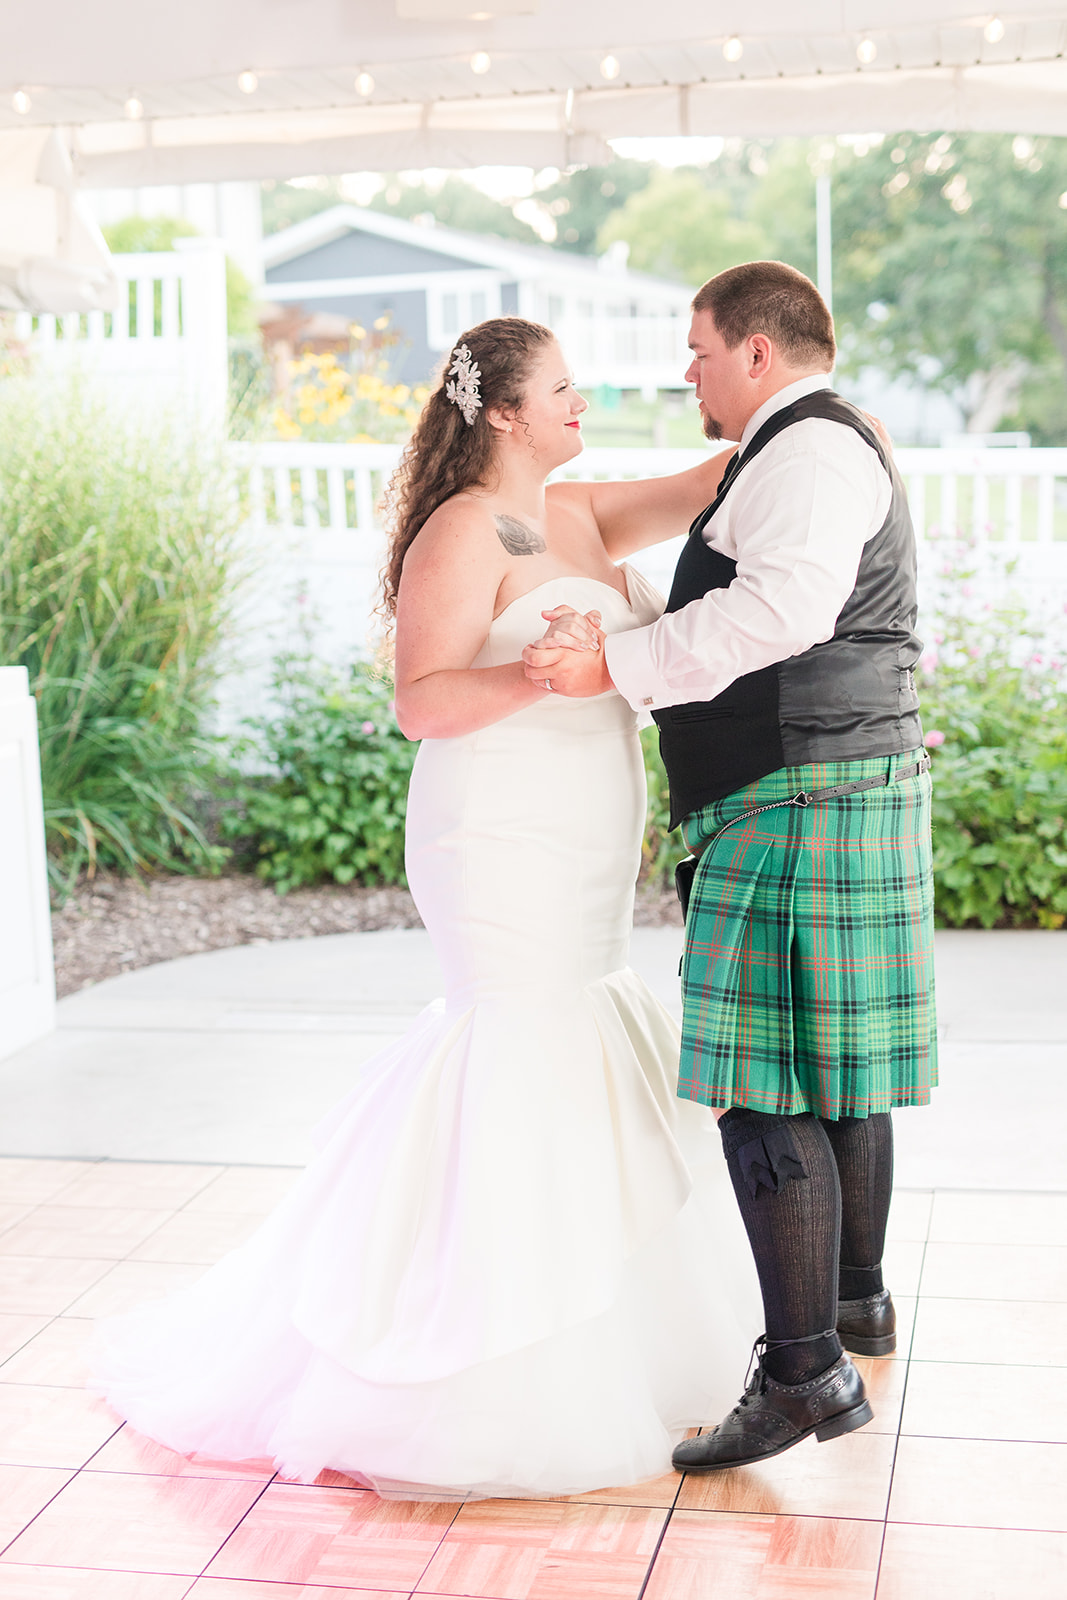 Bride and groom sharing their first dance at their Bay Pointe Inn wedding in Shelbyville, Michigan